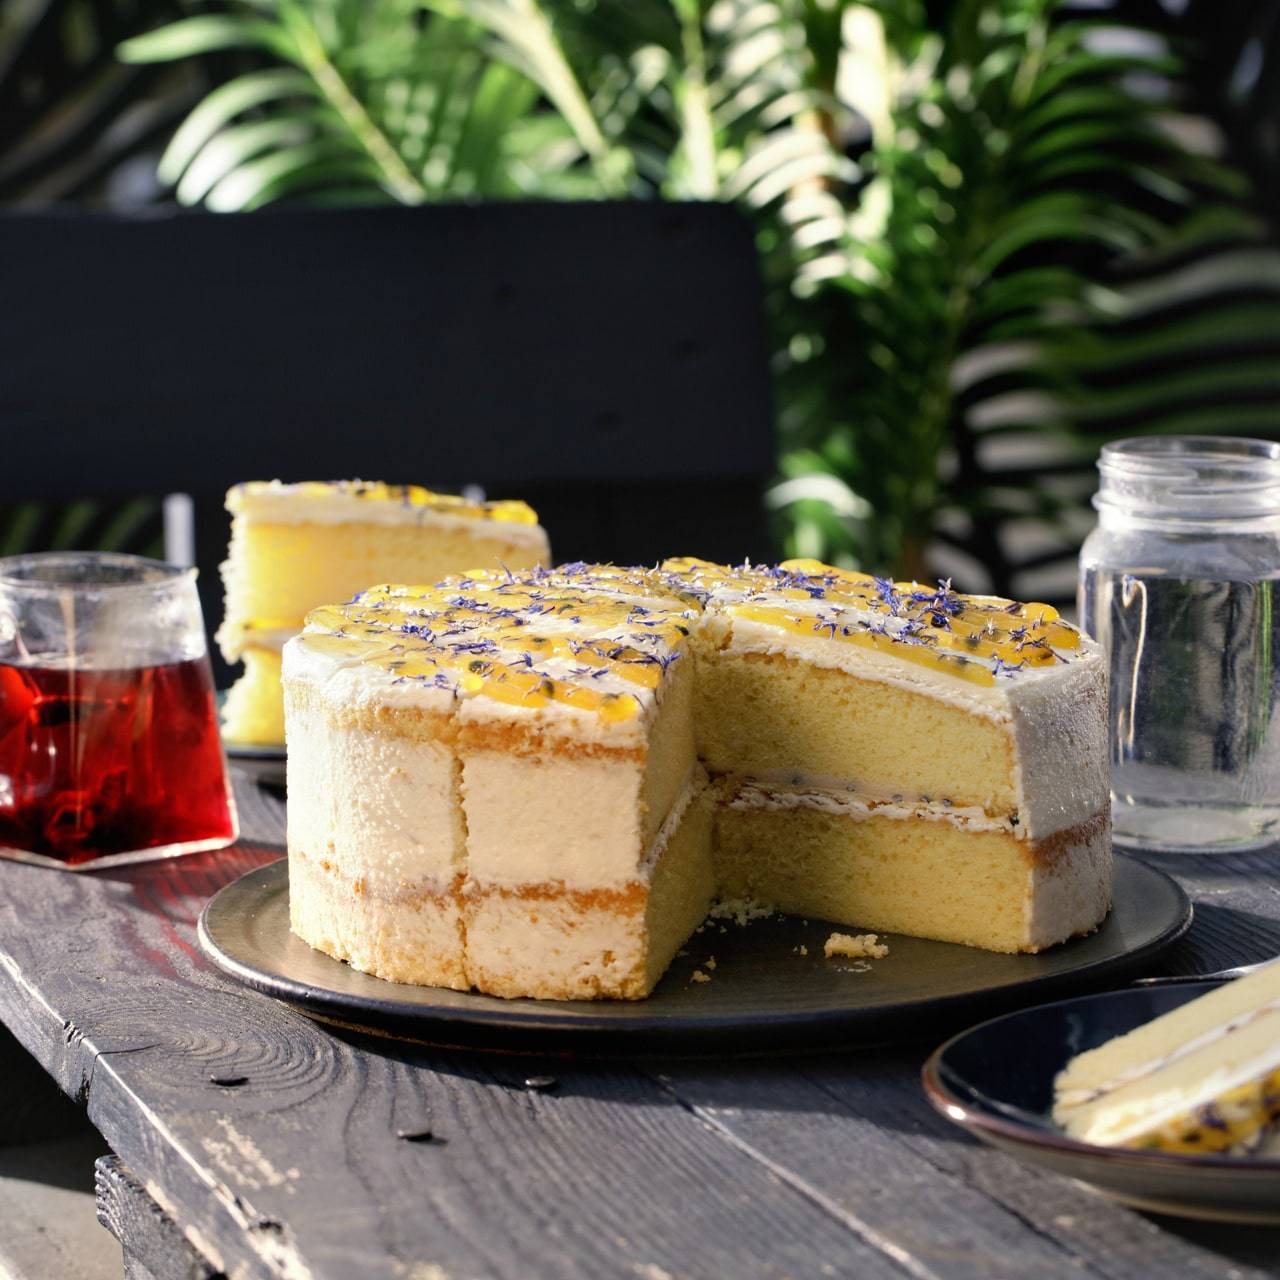 Fruity Passionfruit & Lime Cake